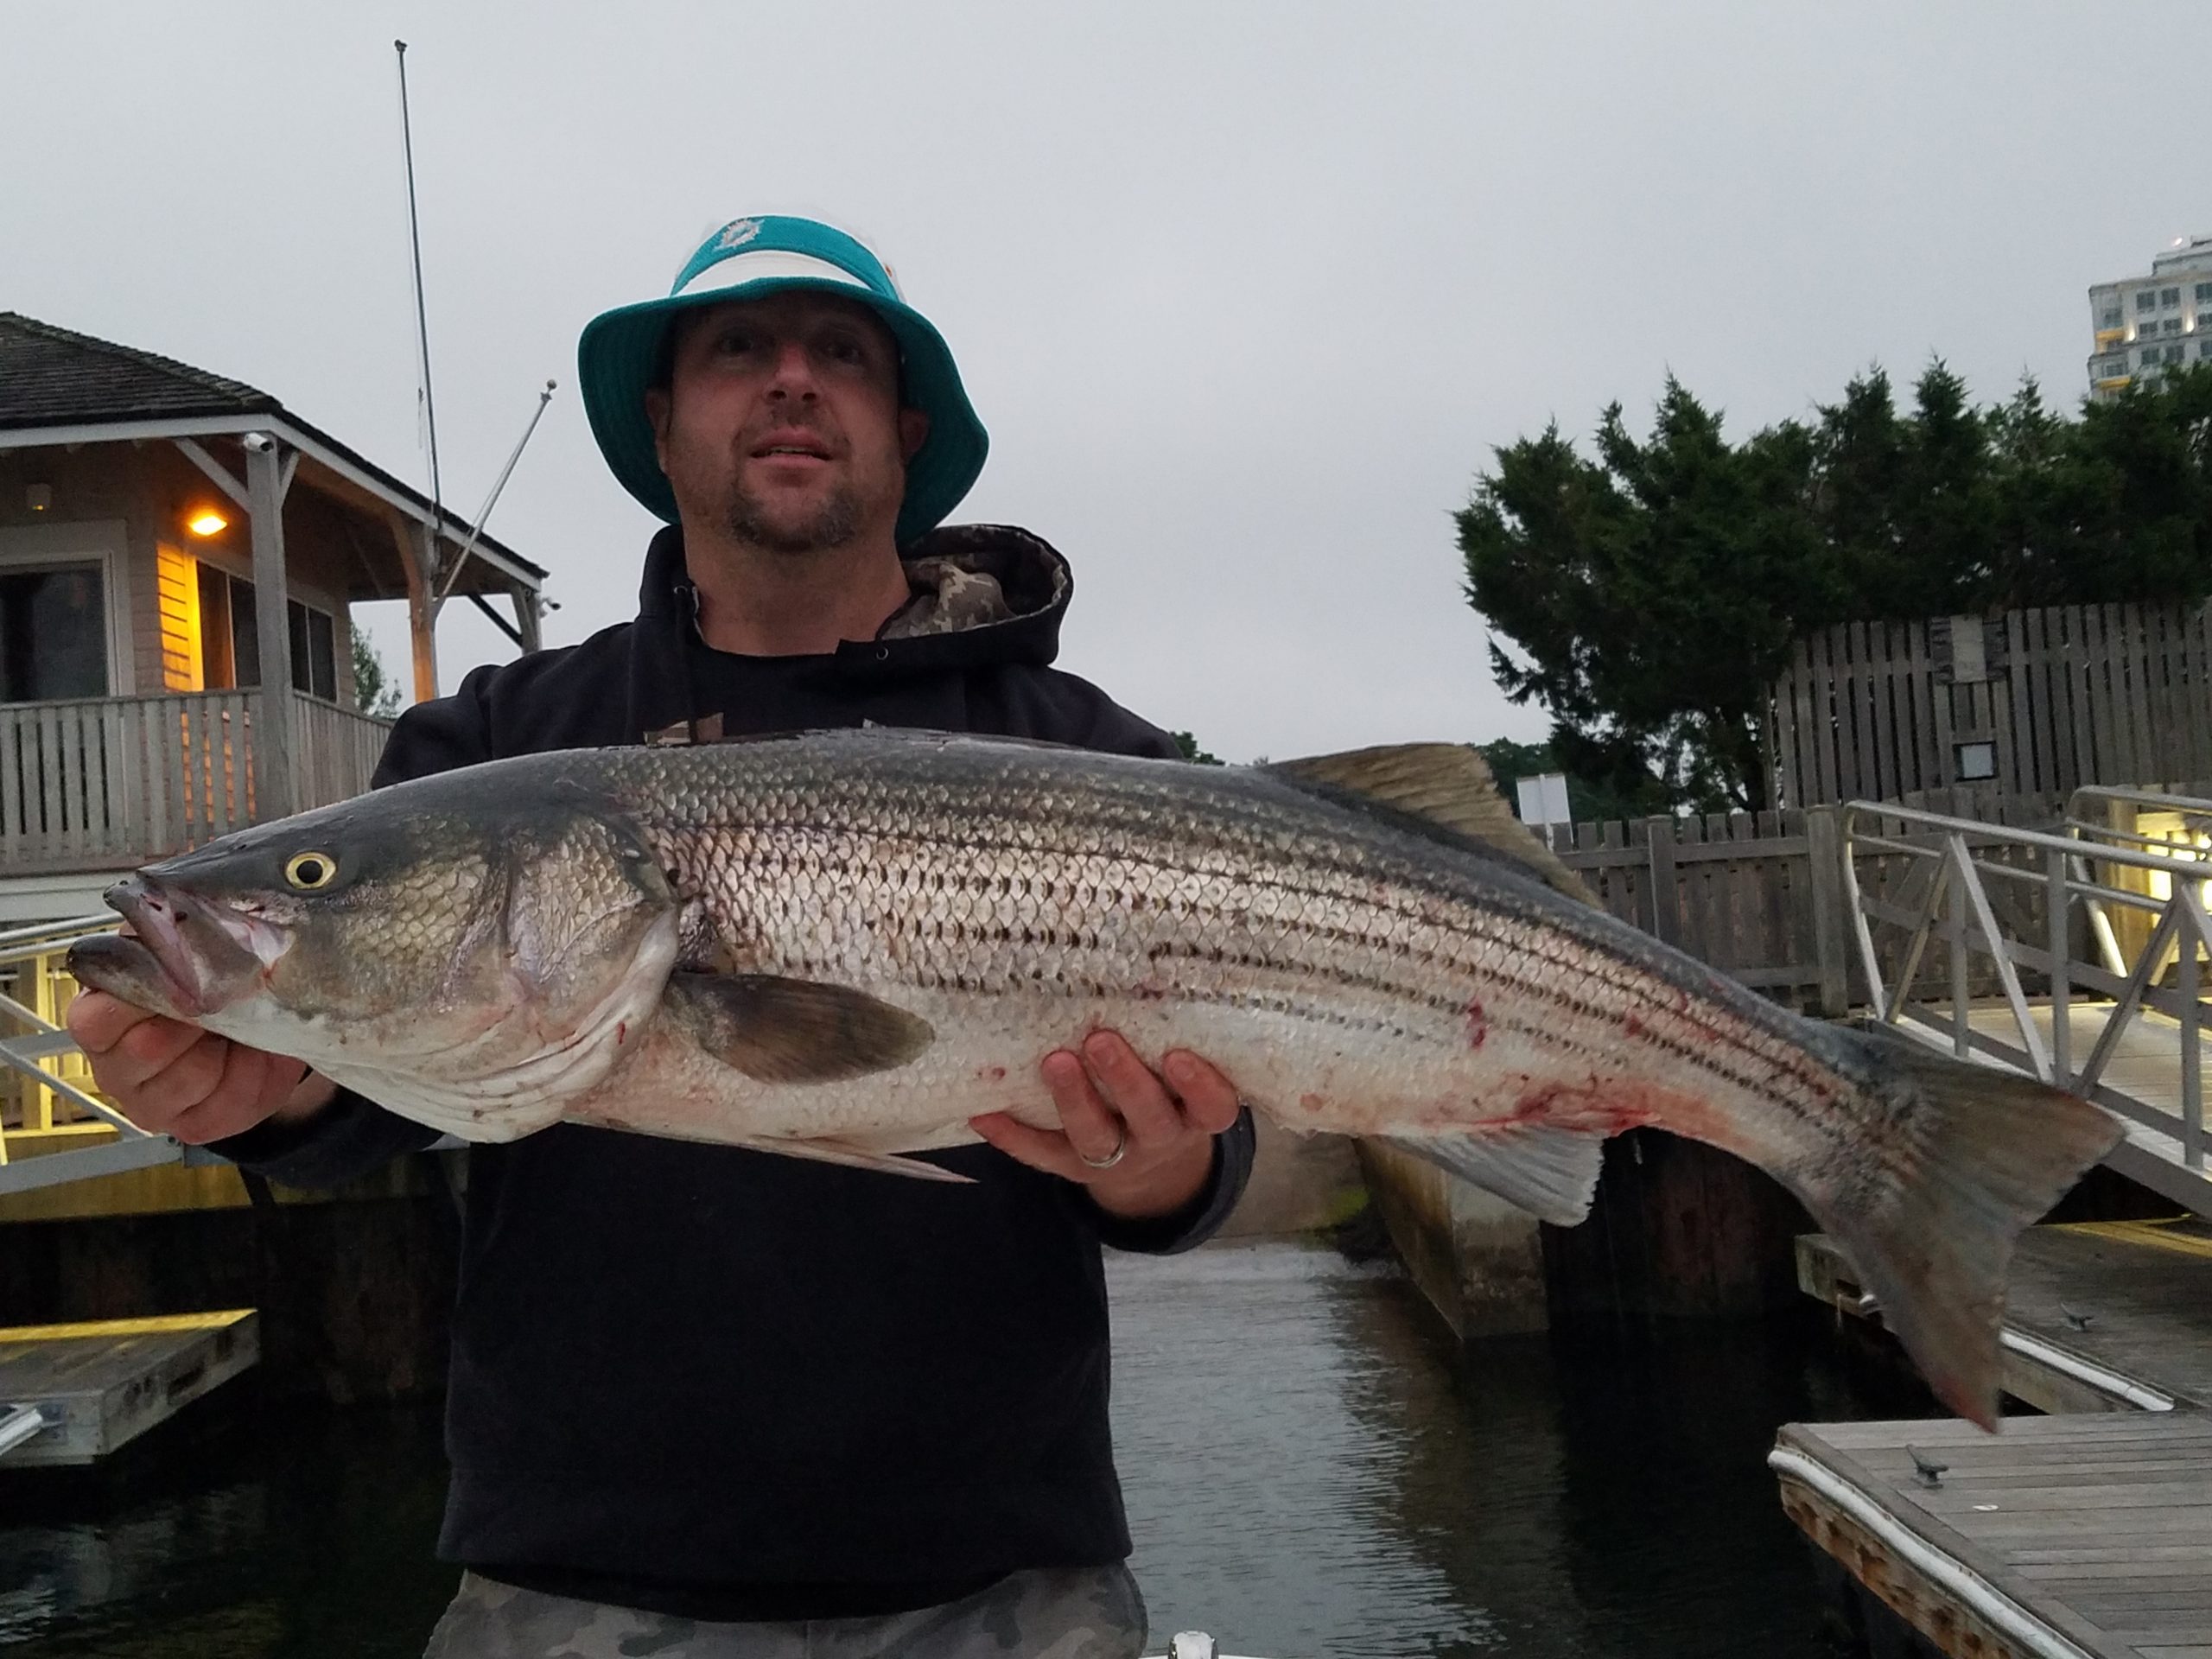 RI Fishing Reports - We are your #1 source for Fishing reports